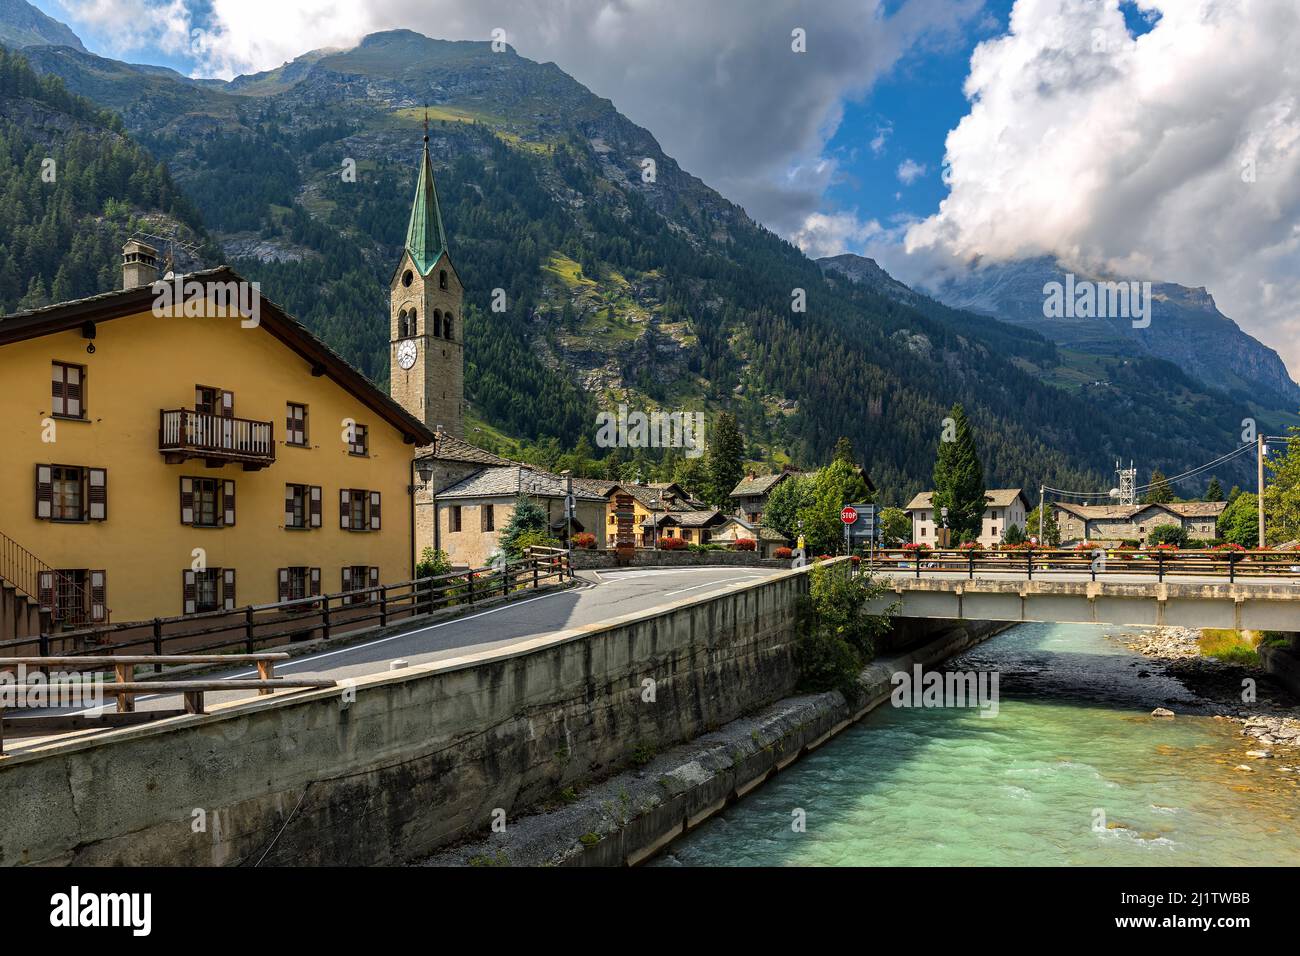 Bridge over mountain river along houses and old church on background in small town of Gressoney-Saint-Jean in Aosta Valley, Italy. Stock Photo